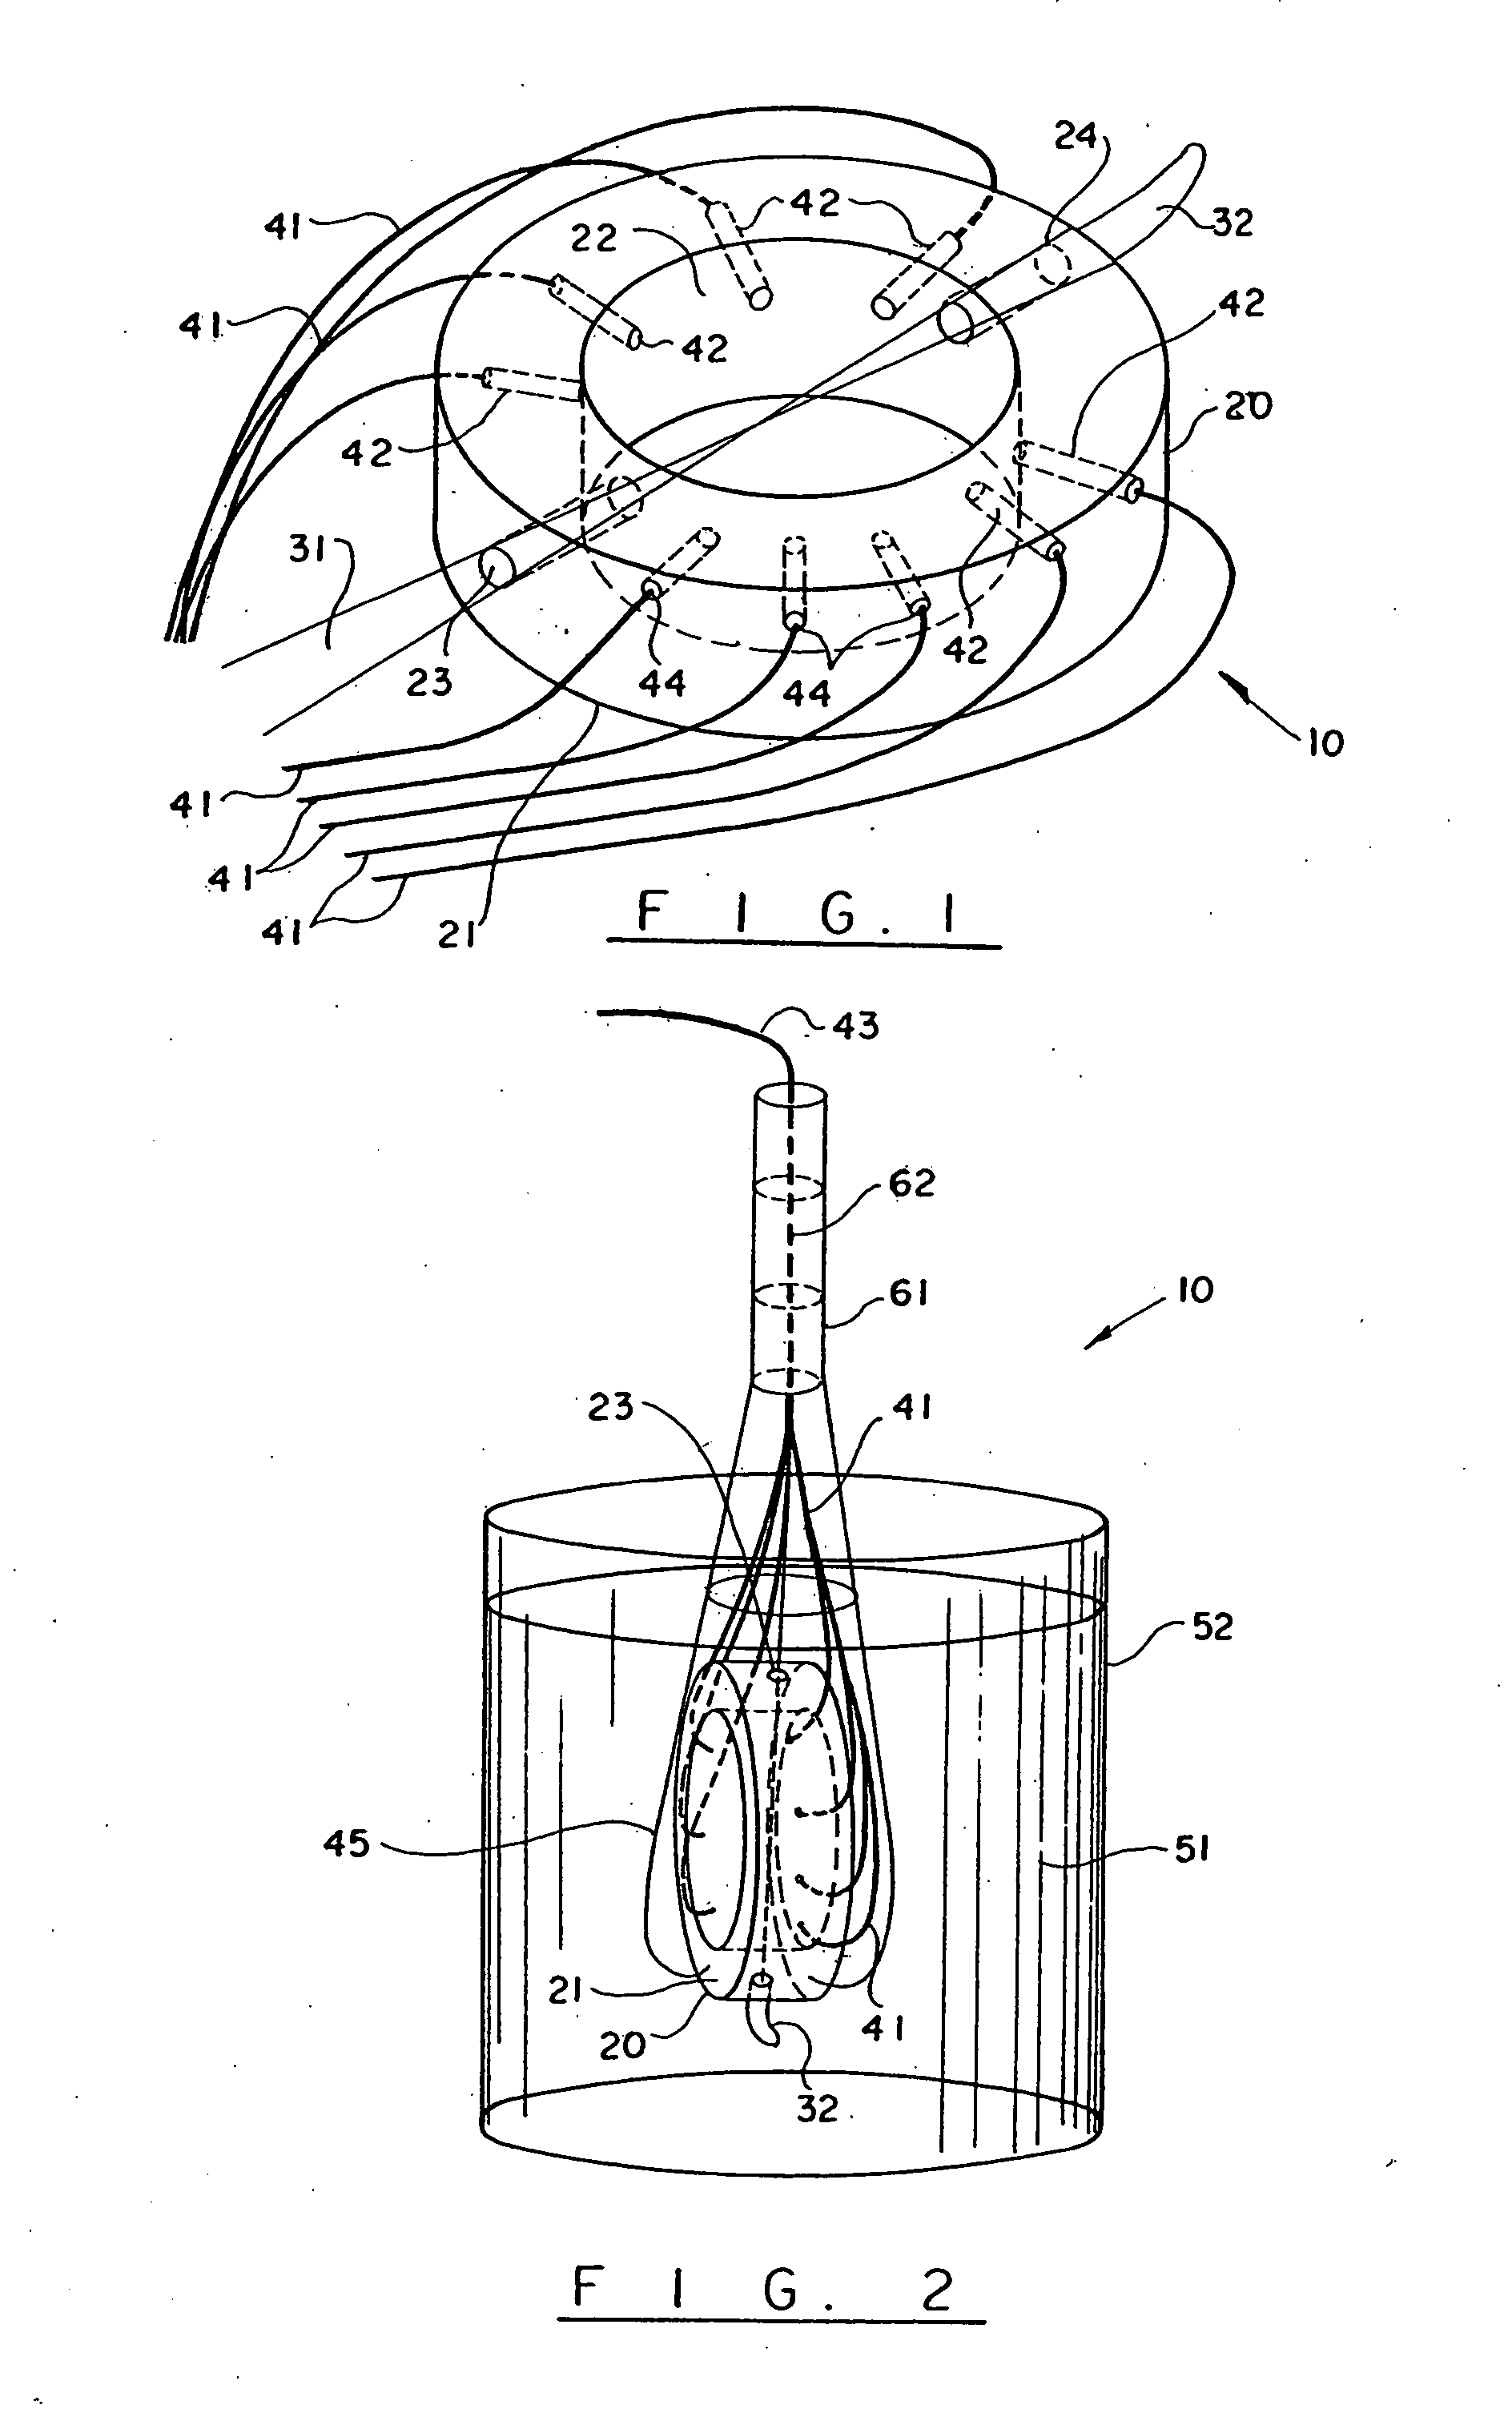 Automatic sampling and dilution apparatus for use in a polymer analysis system